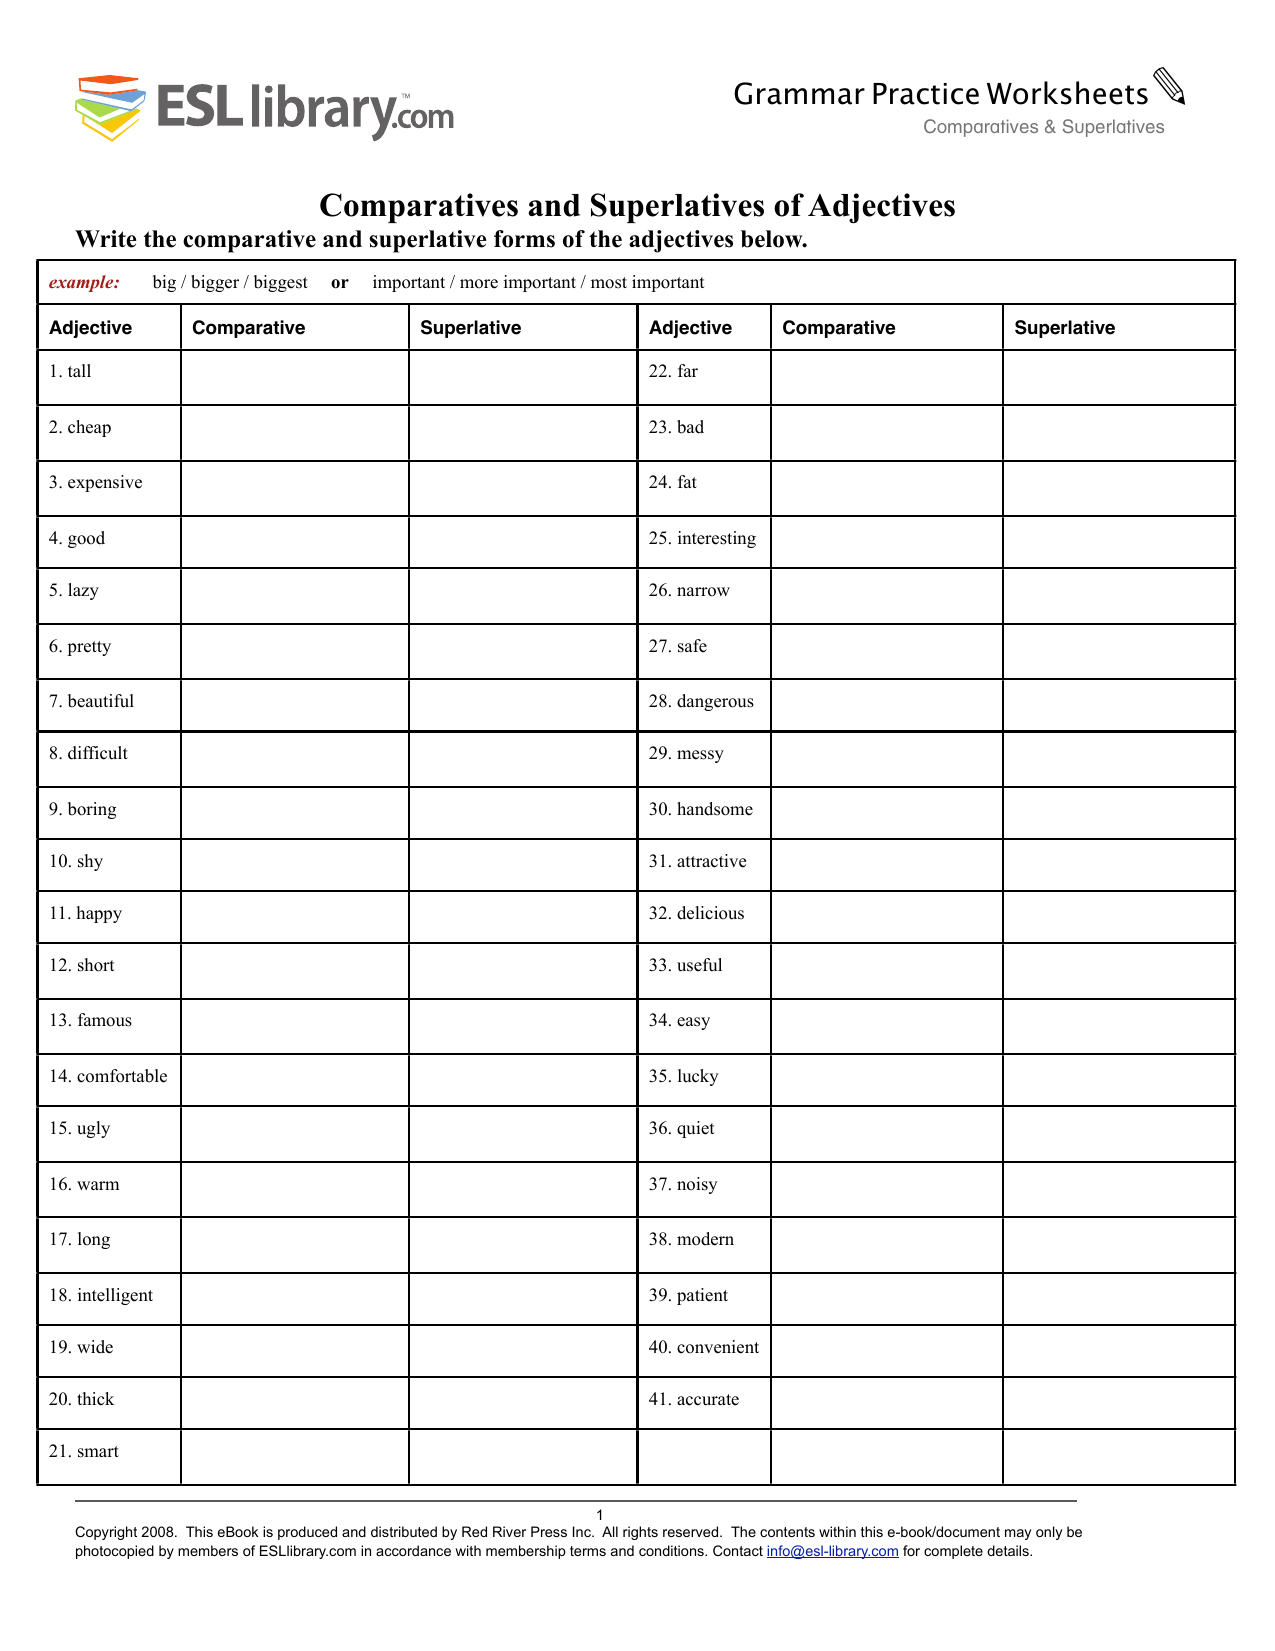 comparatives-superlatives-worksheet-with-answers-1